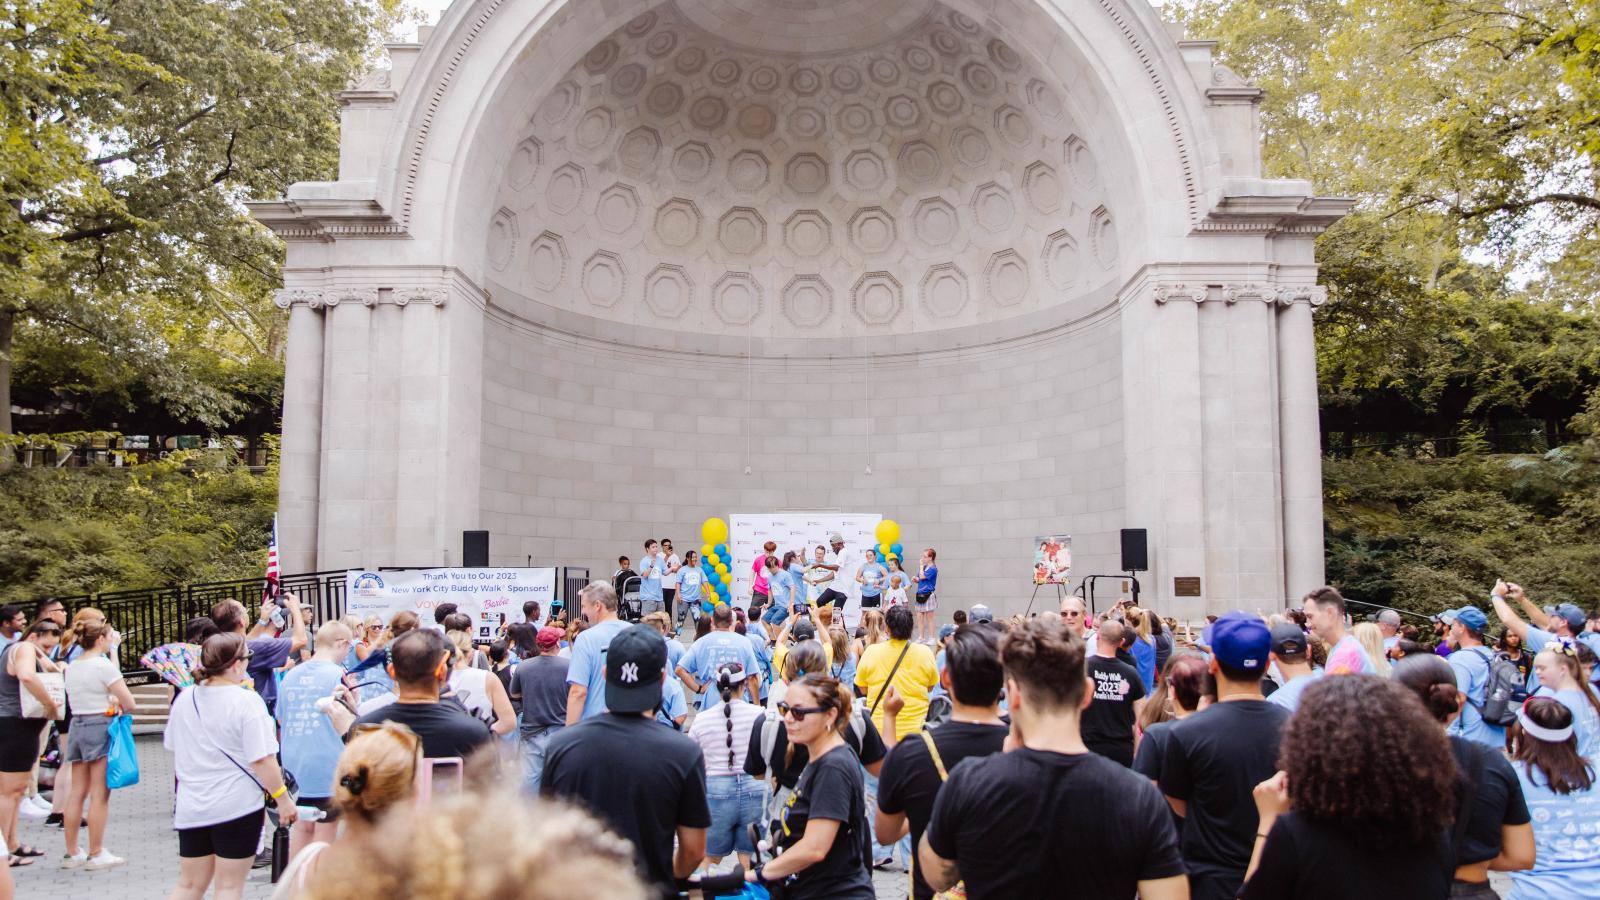 photo of a crowd at the Central Park Bandshell, a large dome-shaped stage structure